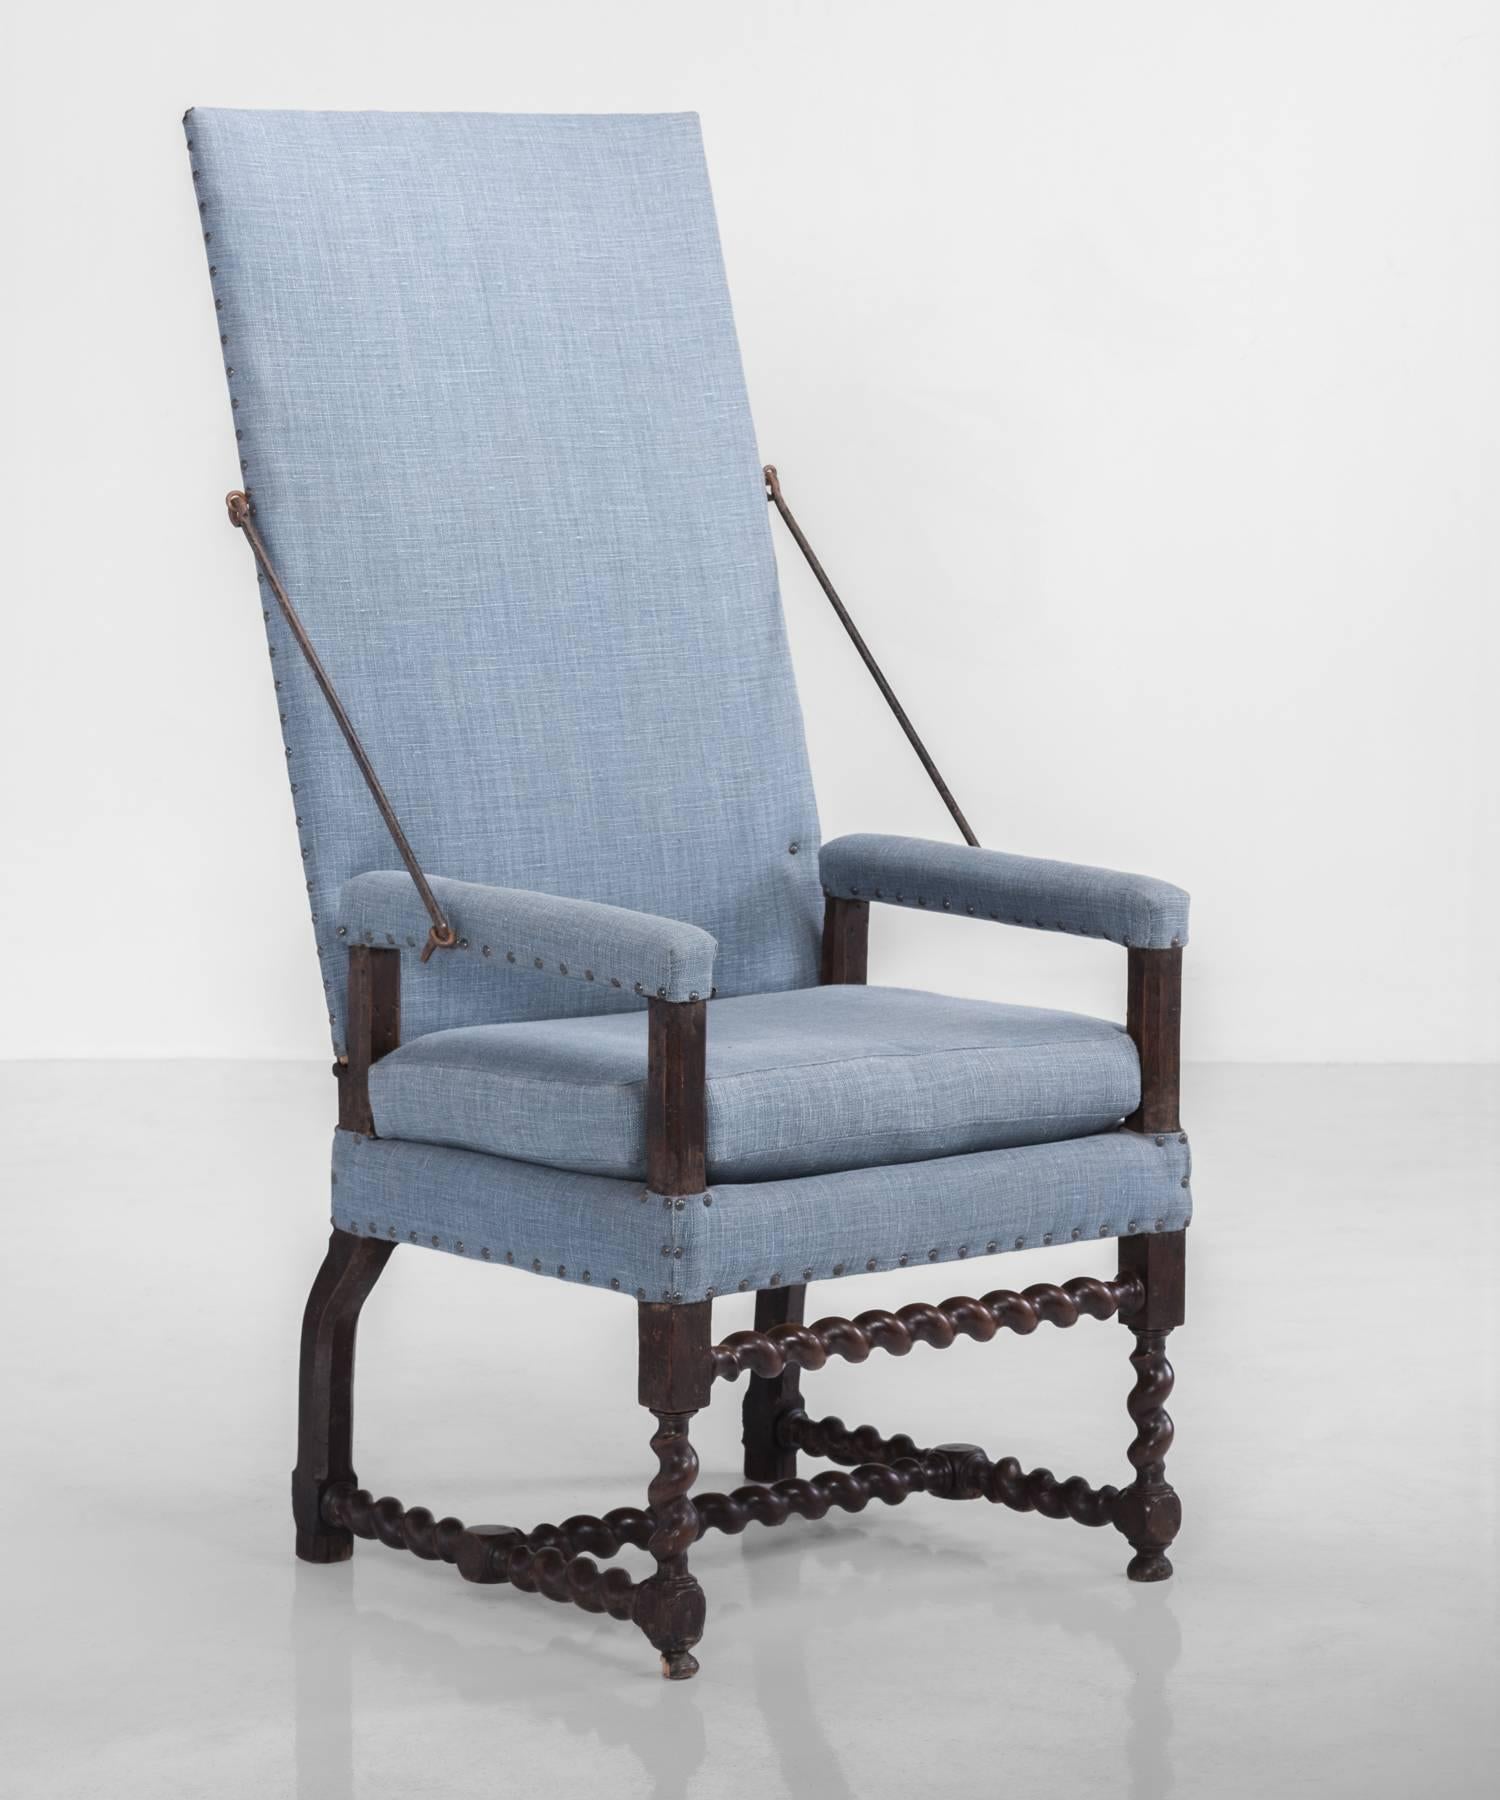 Primitive tallback chair, France, circa 1710.

Includes original iron hardware and beautifully turned legs and stretchers. Restored and newly reupholstered including contrasting fabric on back.